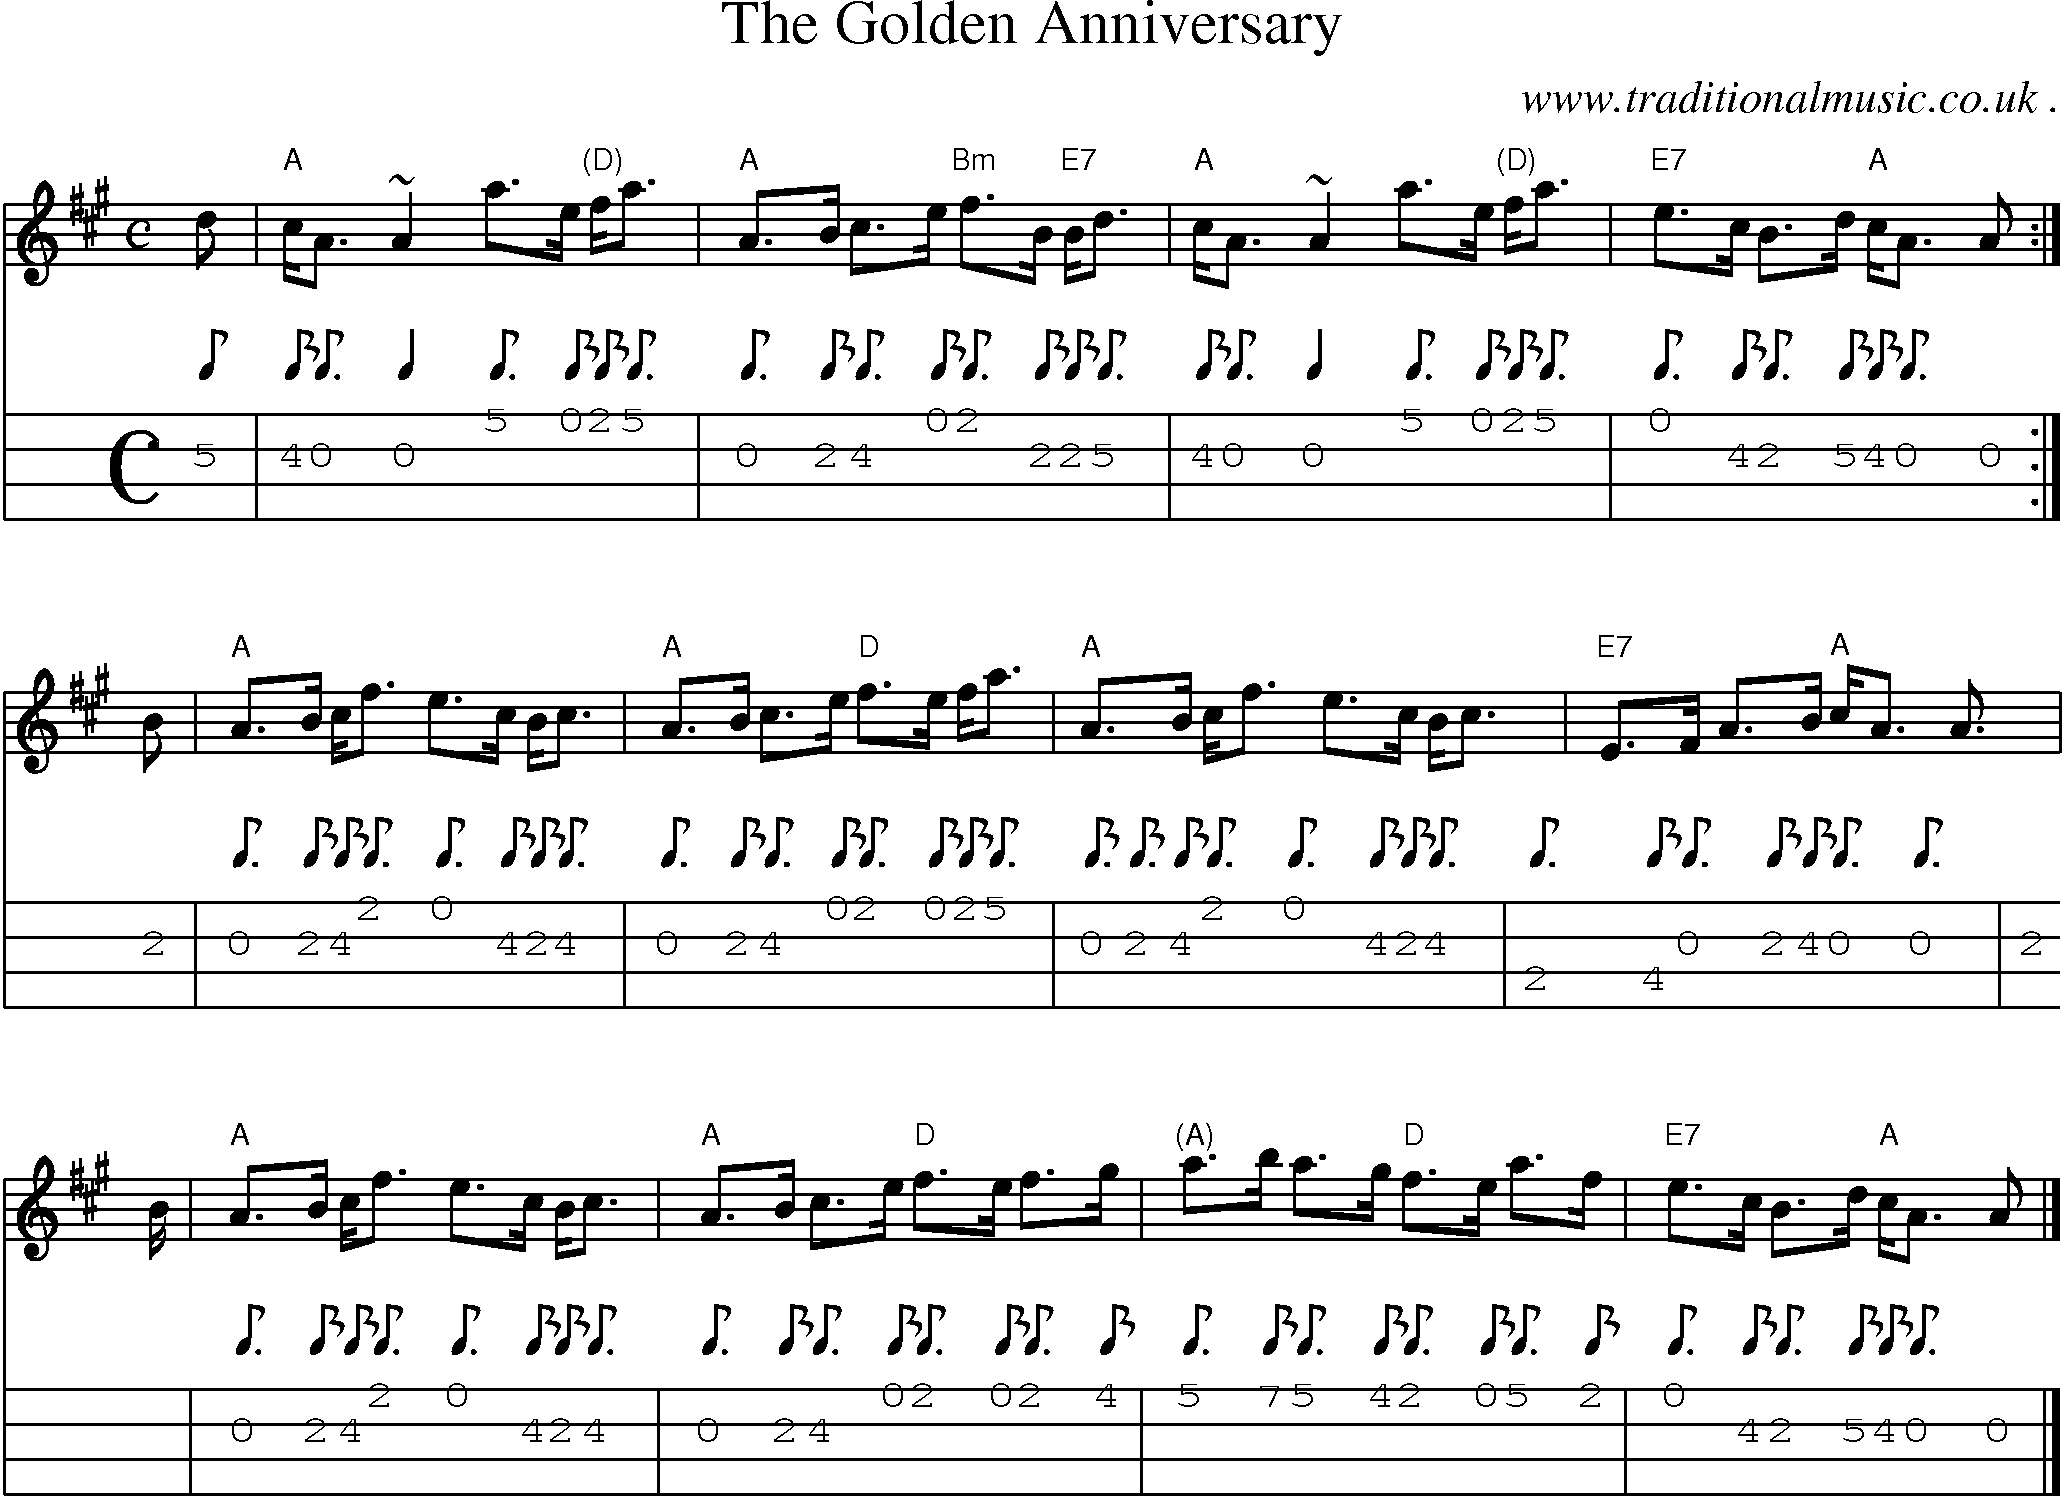 Sheet-music  score, Chords and Mandolin Tabs for The Golden Anniversary